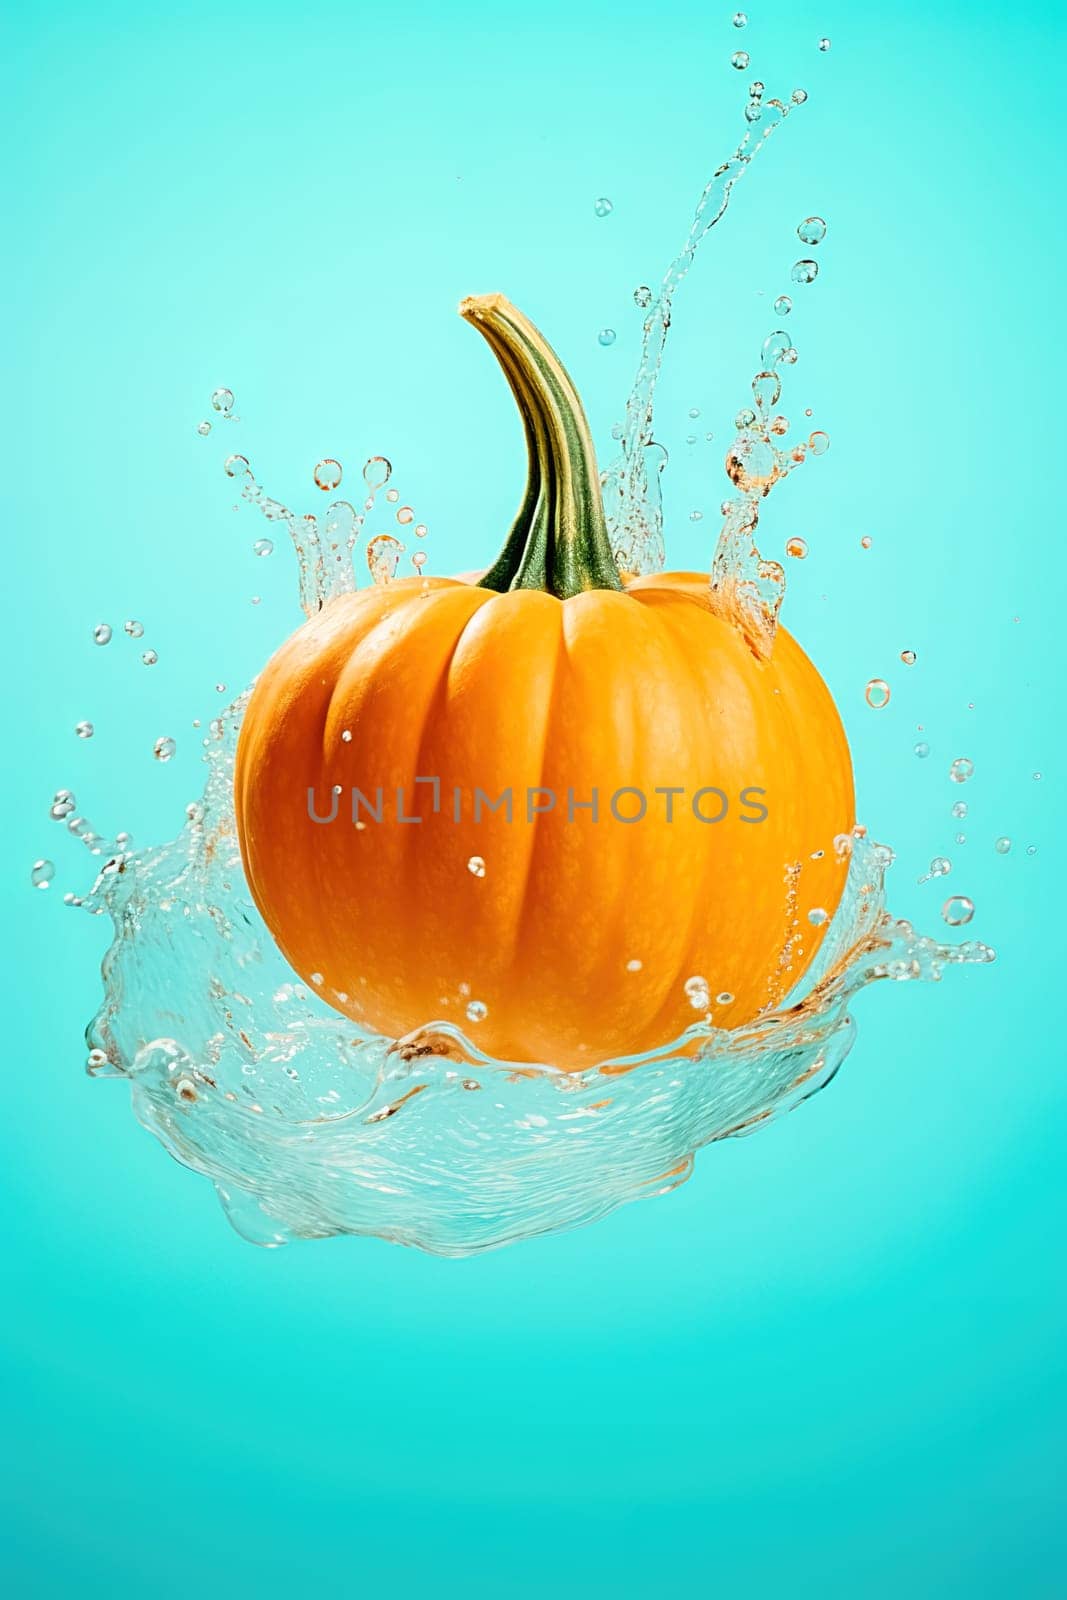 Pumpkin fruit with splashes of water on a blue background. by Yurich32